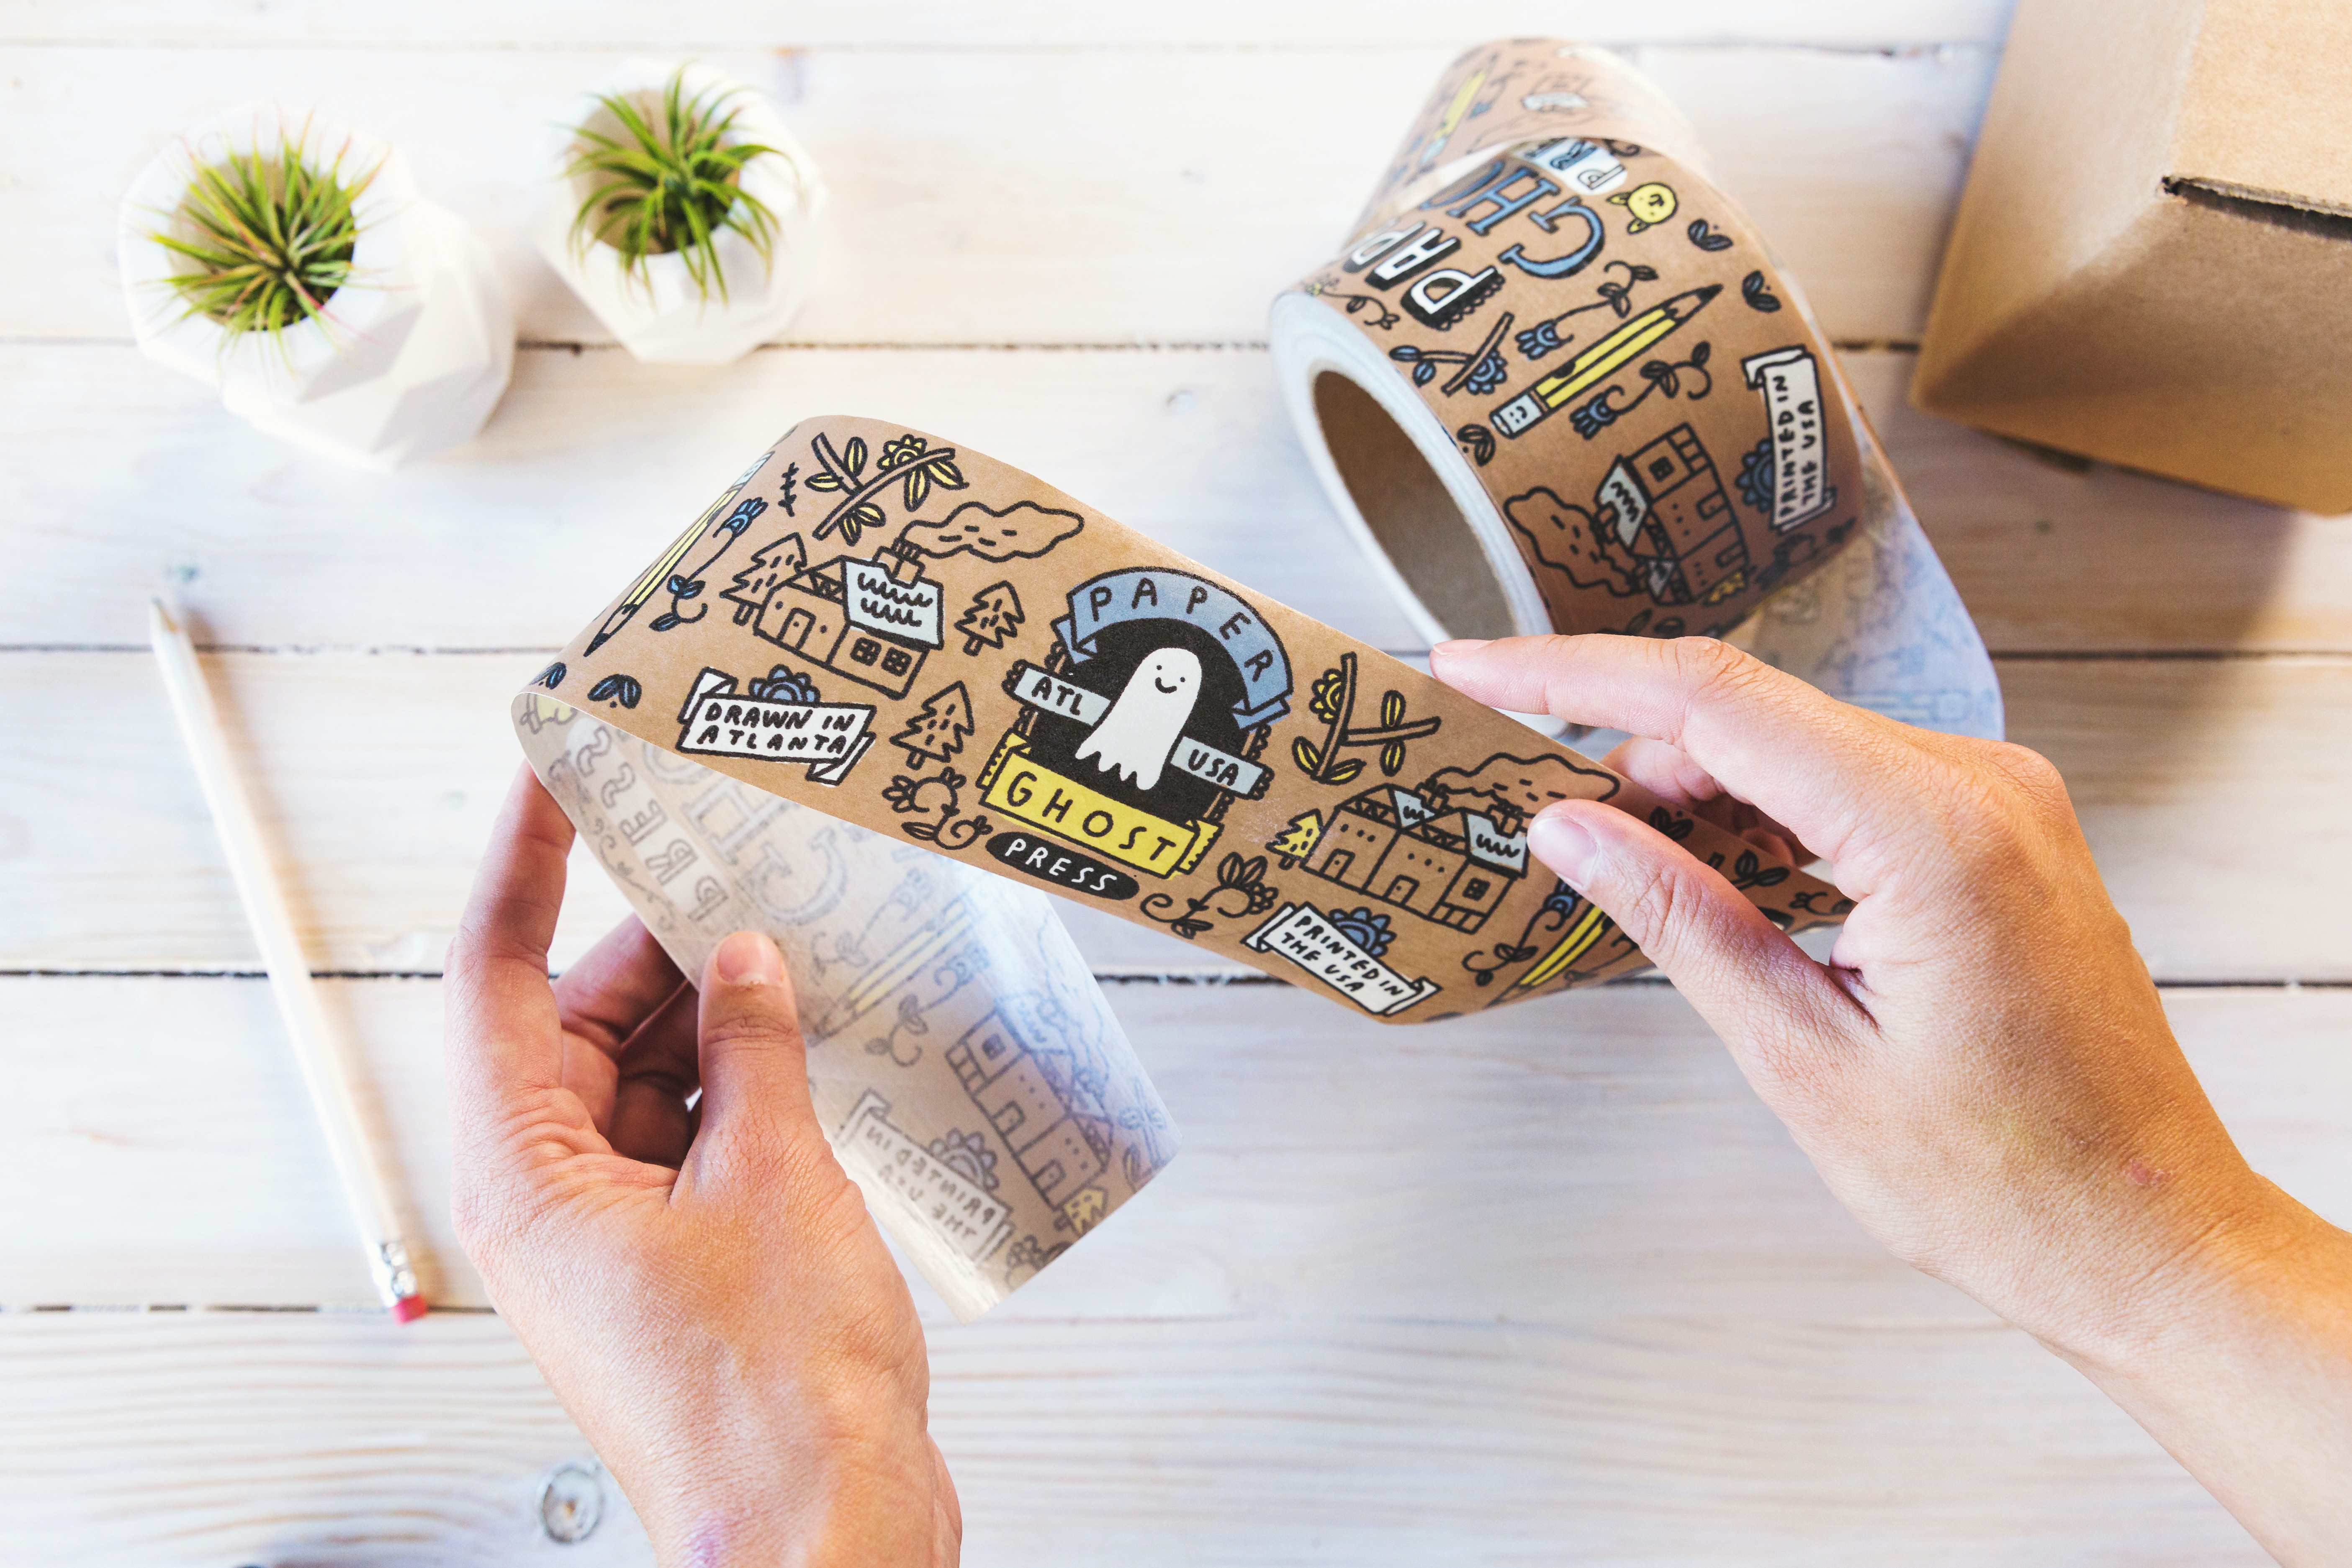 Packaging tape: eco tape with branding in the spirit of Halloween.